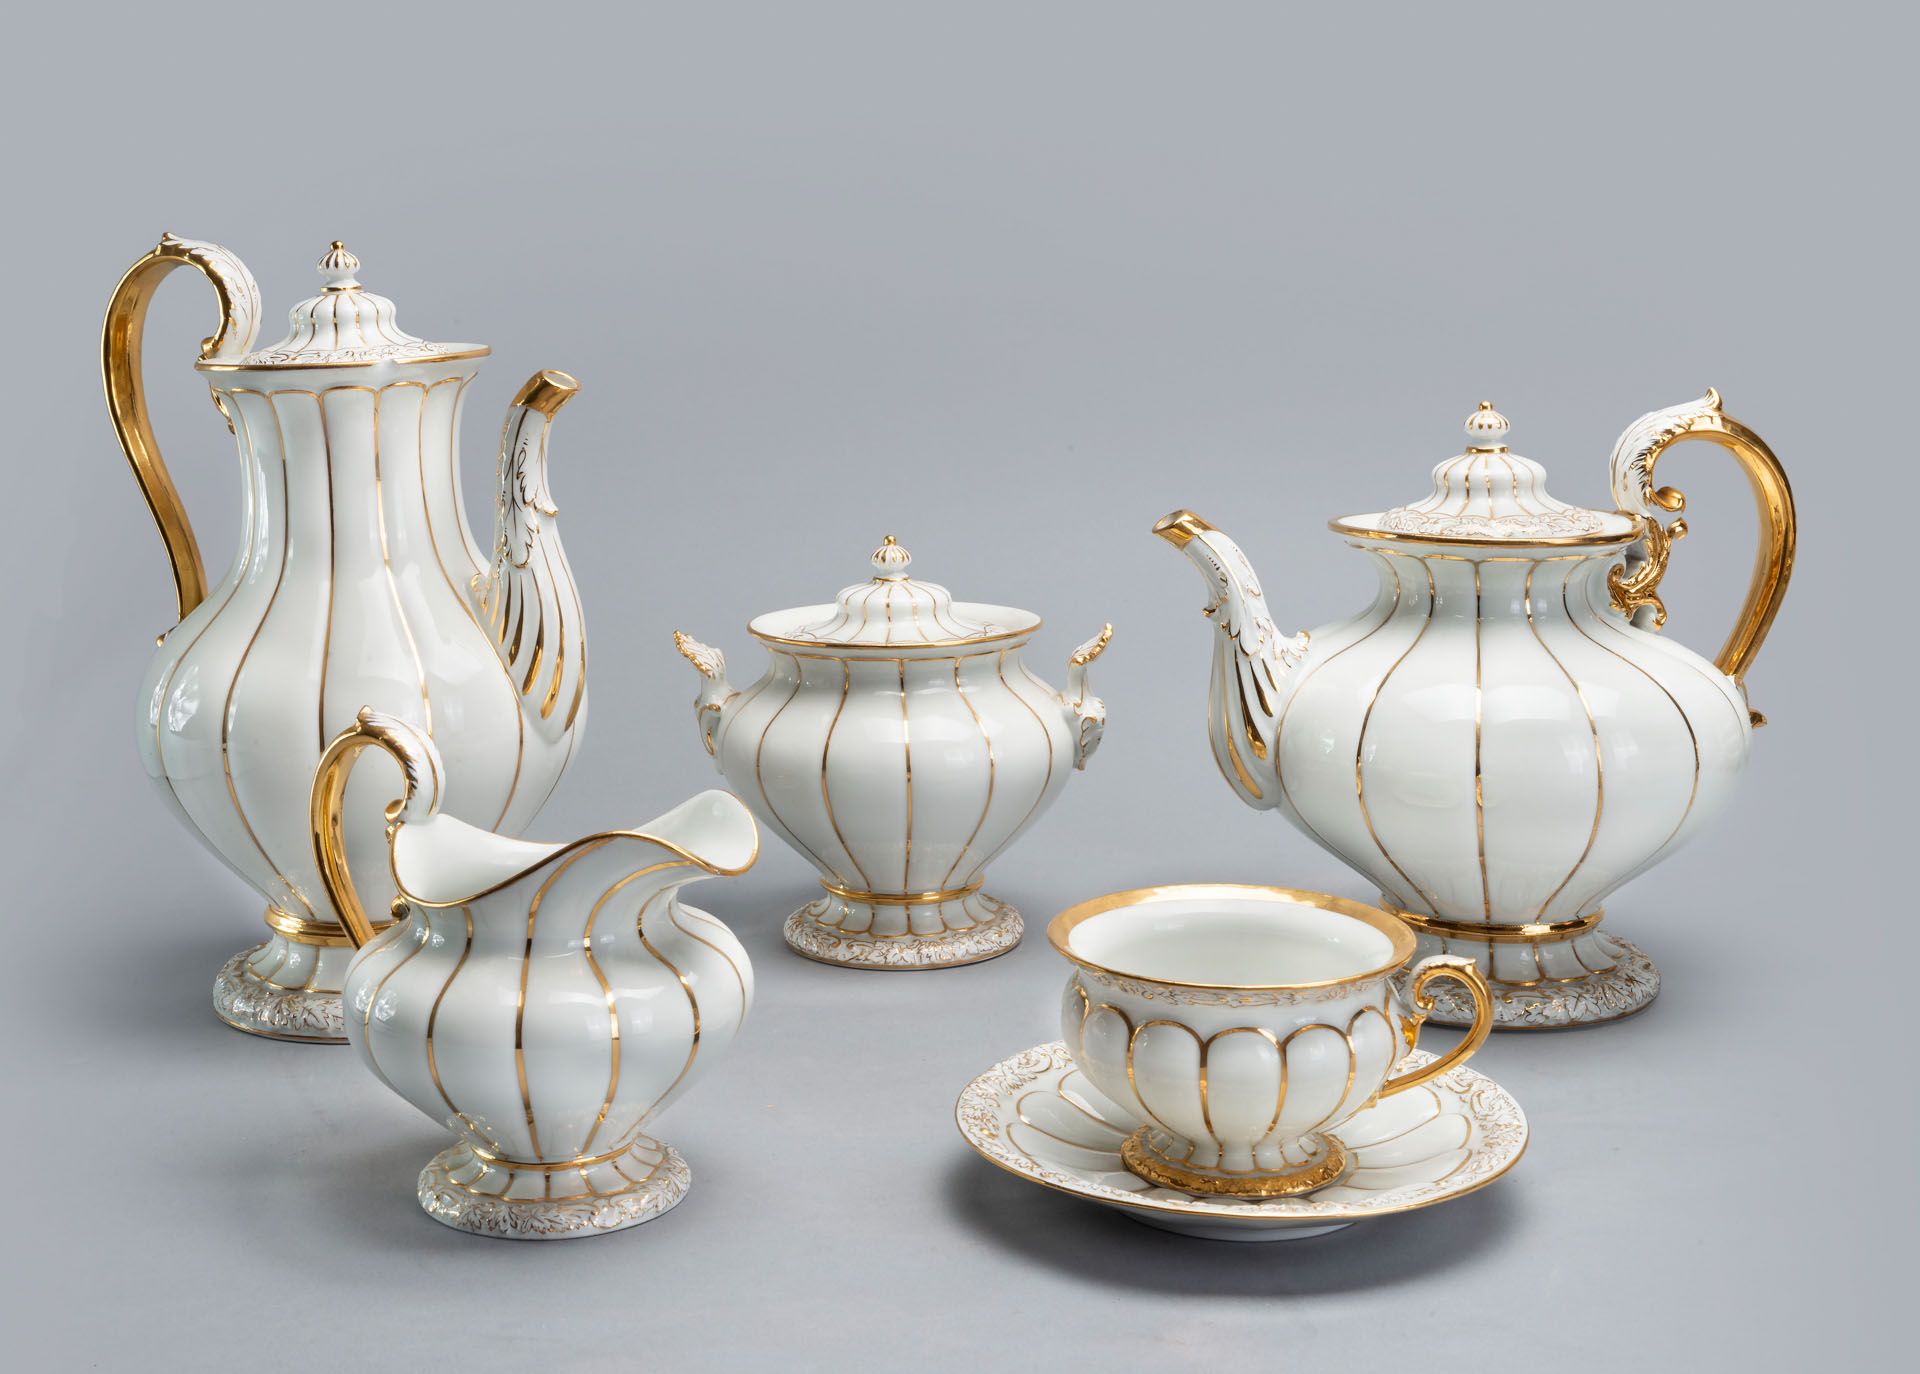 A Fine Meissen Tea and Coffee Service in White and Gold, Early 20th Century - Bild 2 aus 4